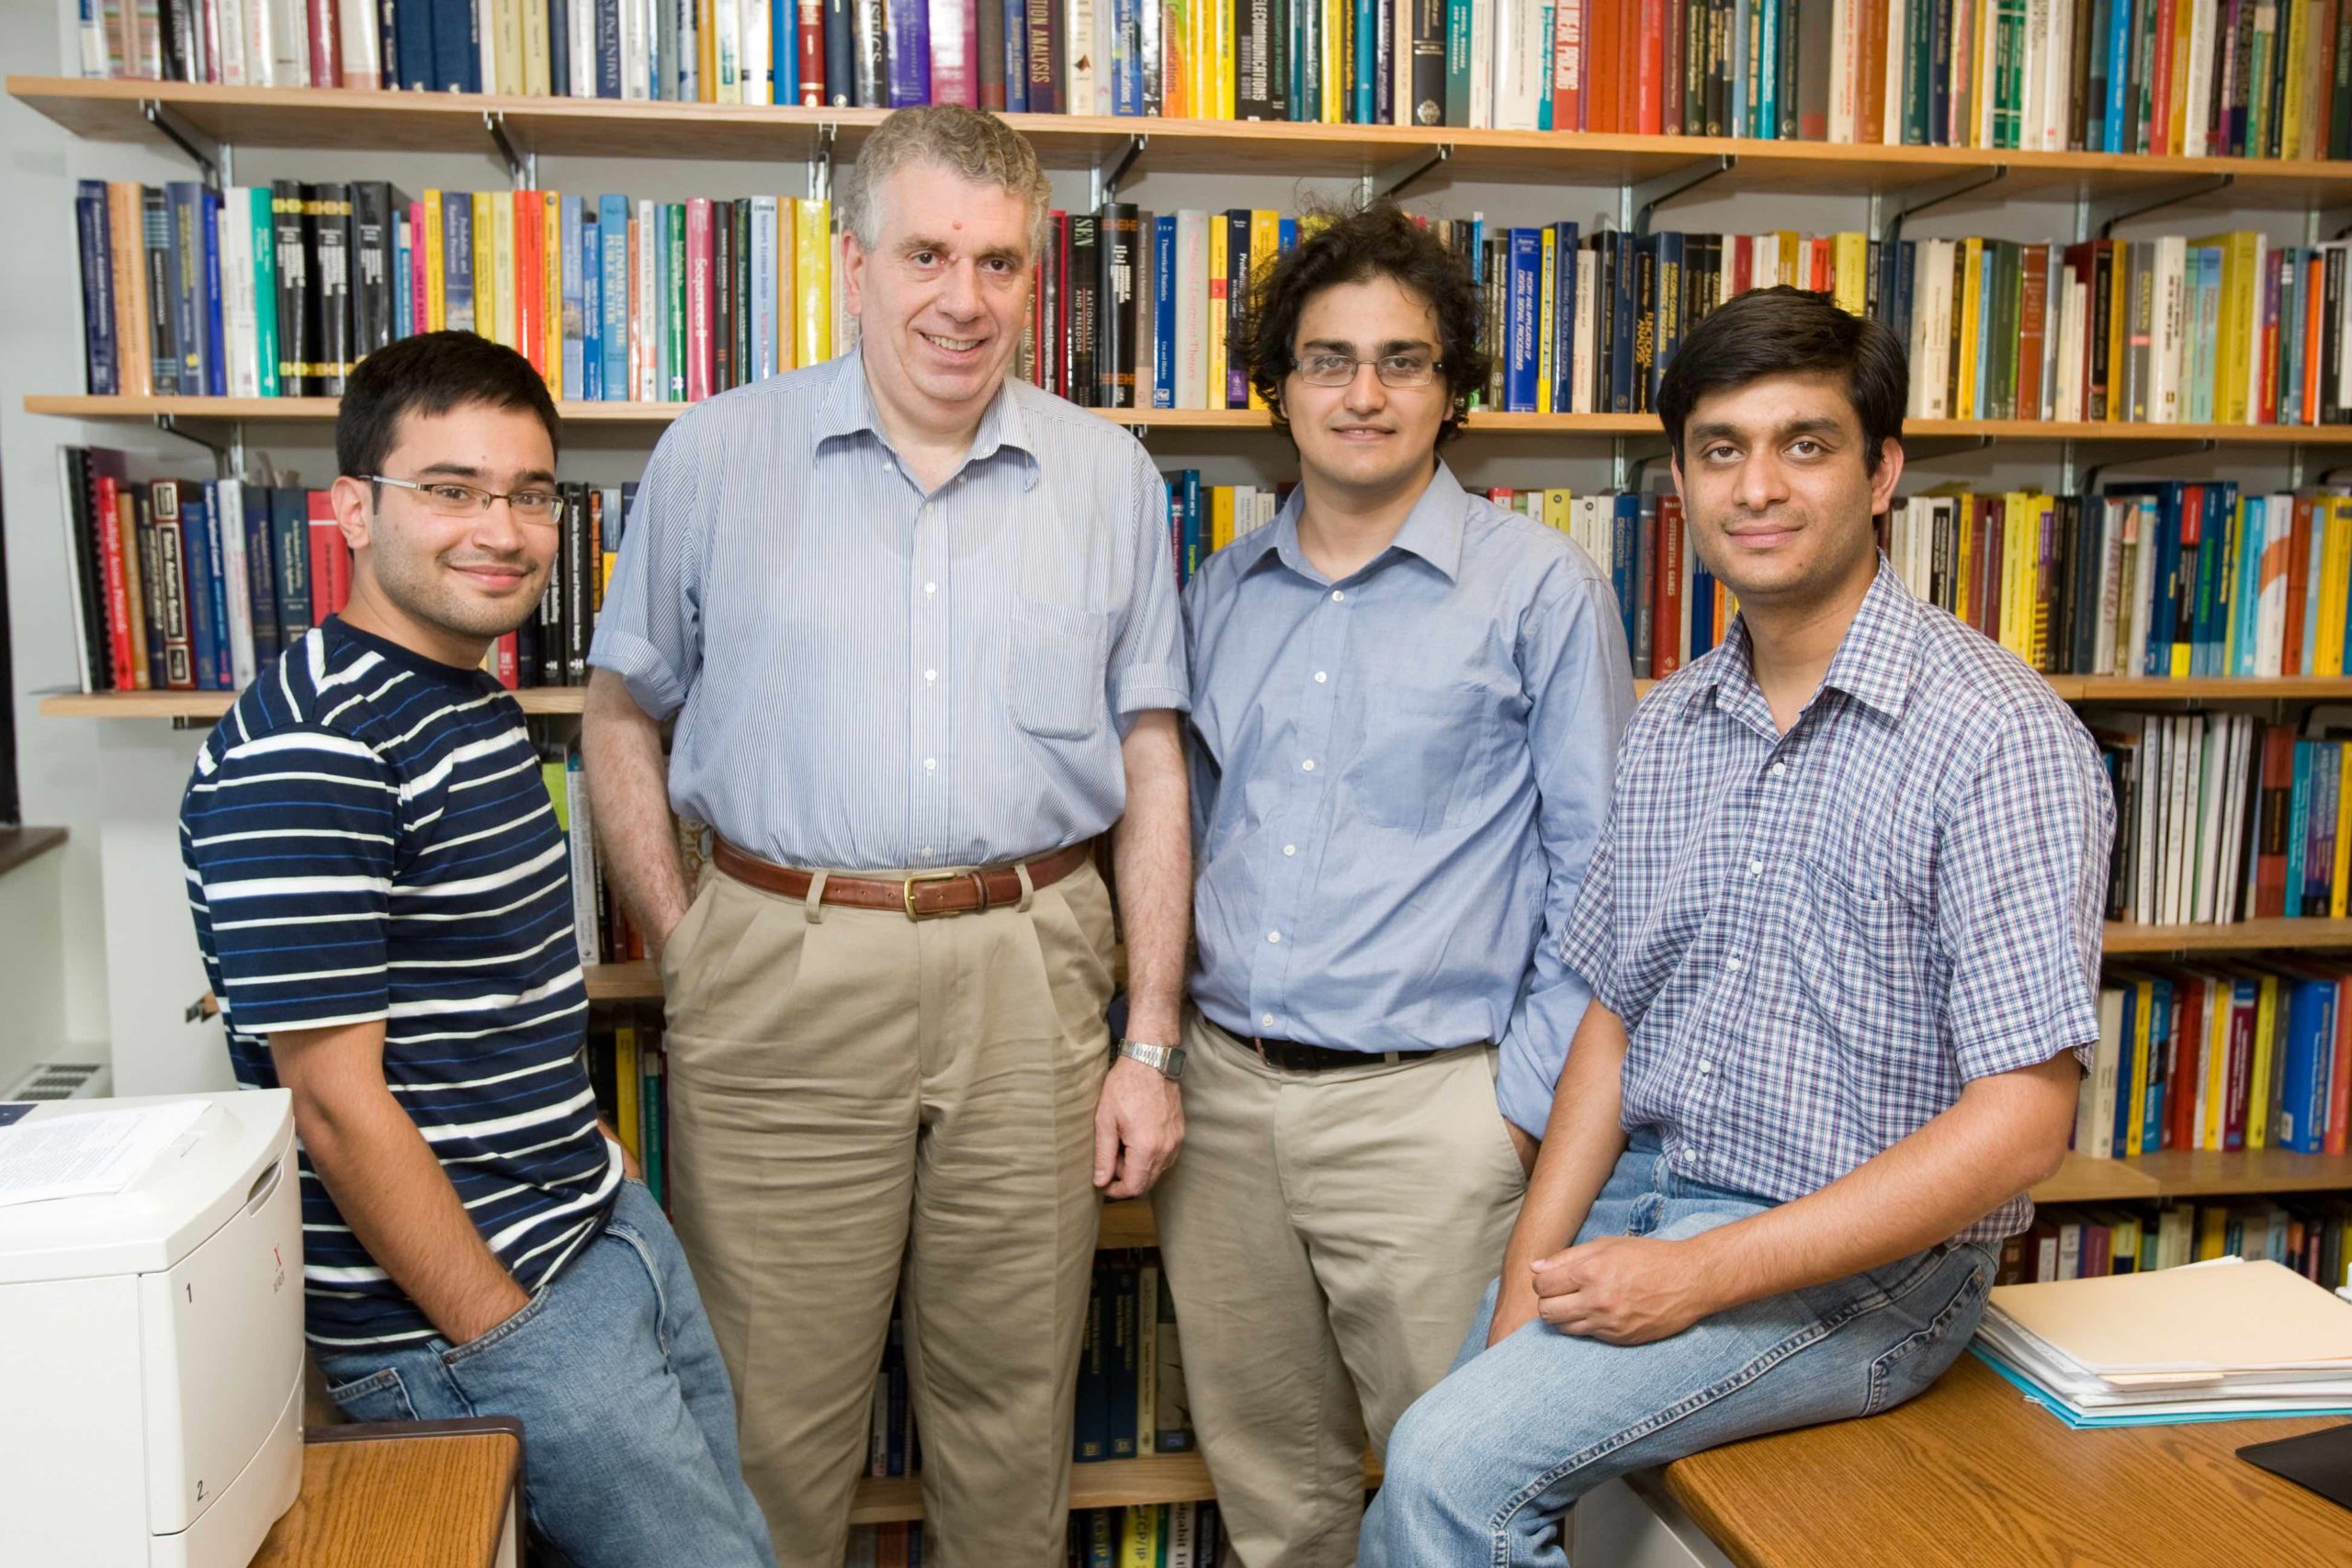 Teneketzis stands with a few of his PhD students.